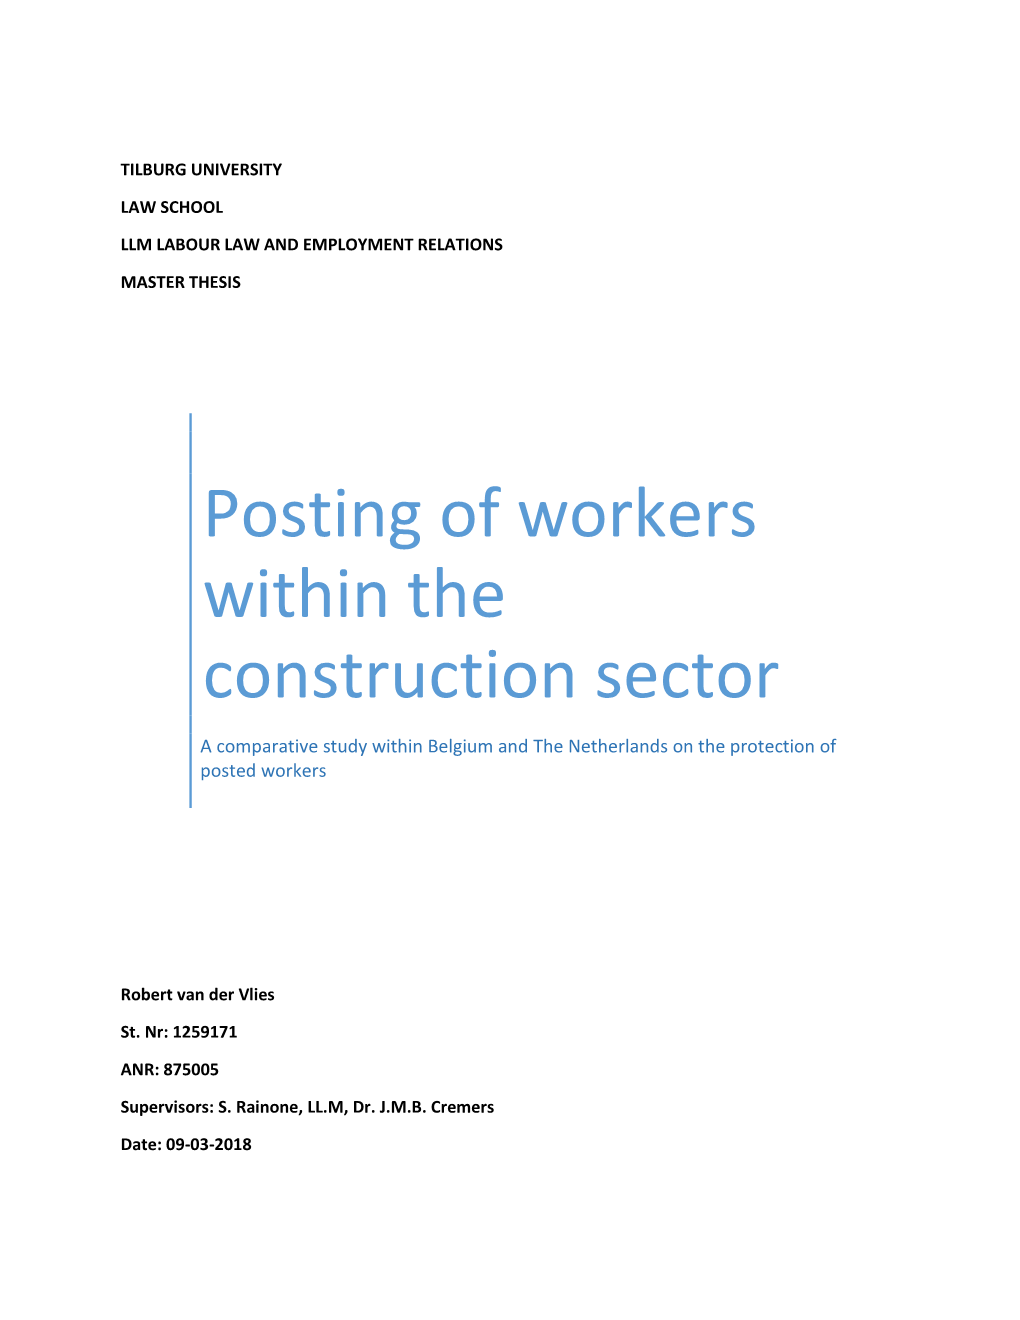 Posting of Workers Within the Construction Sector